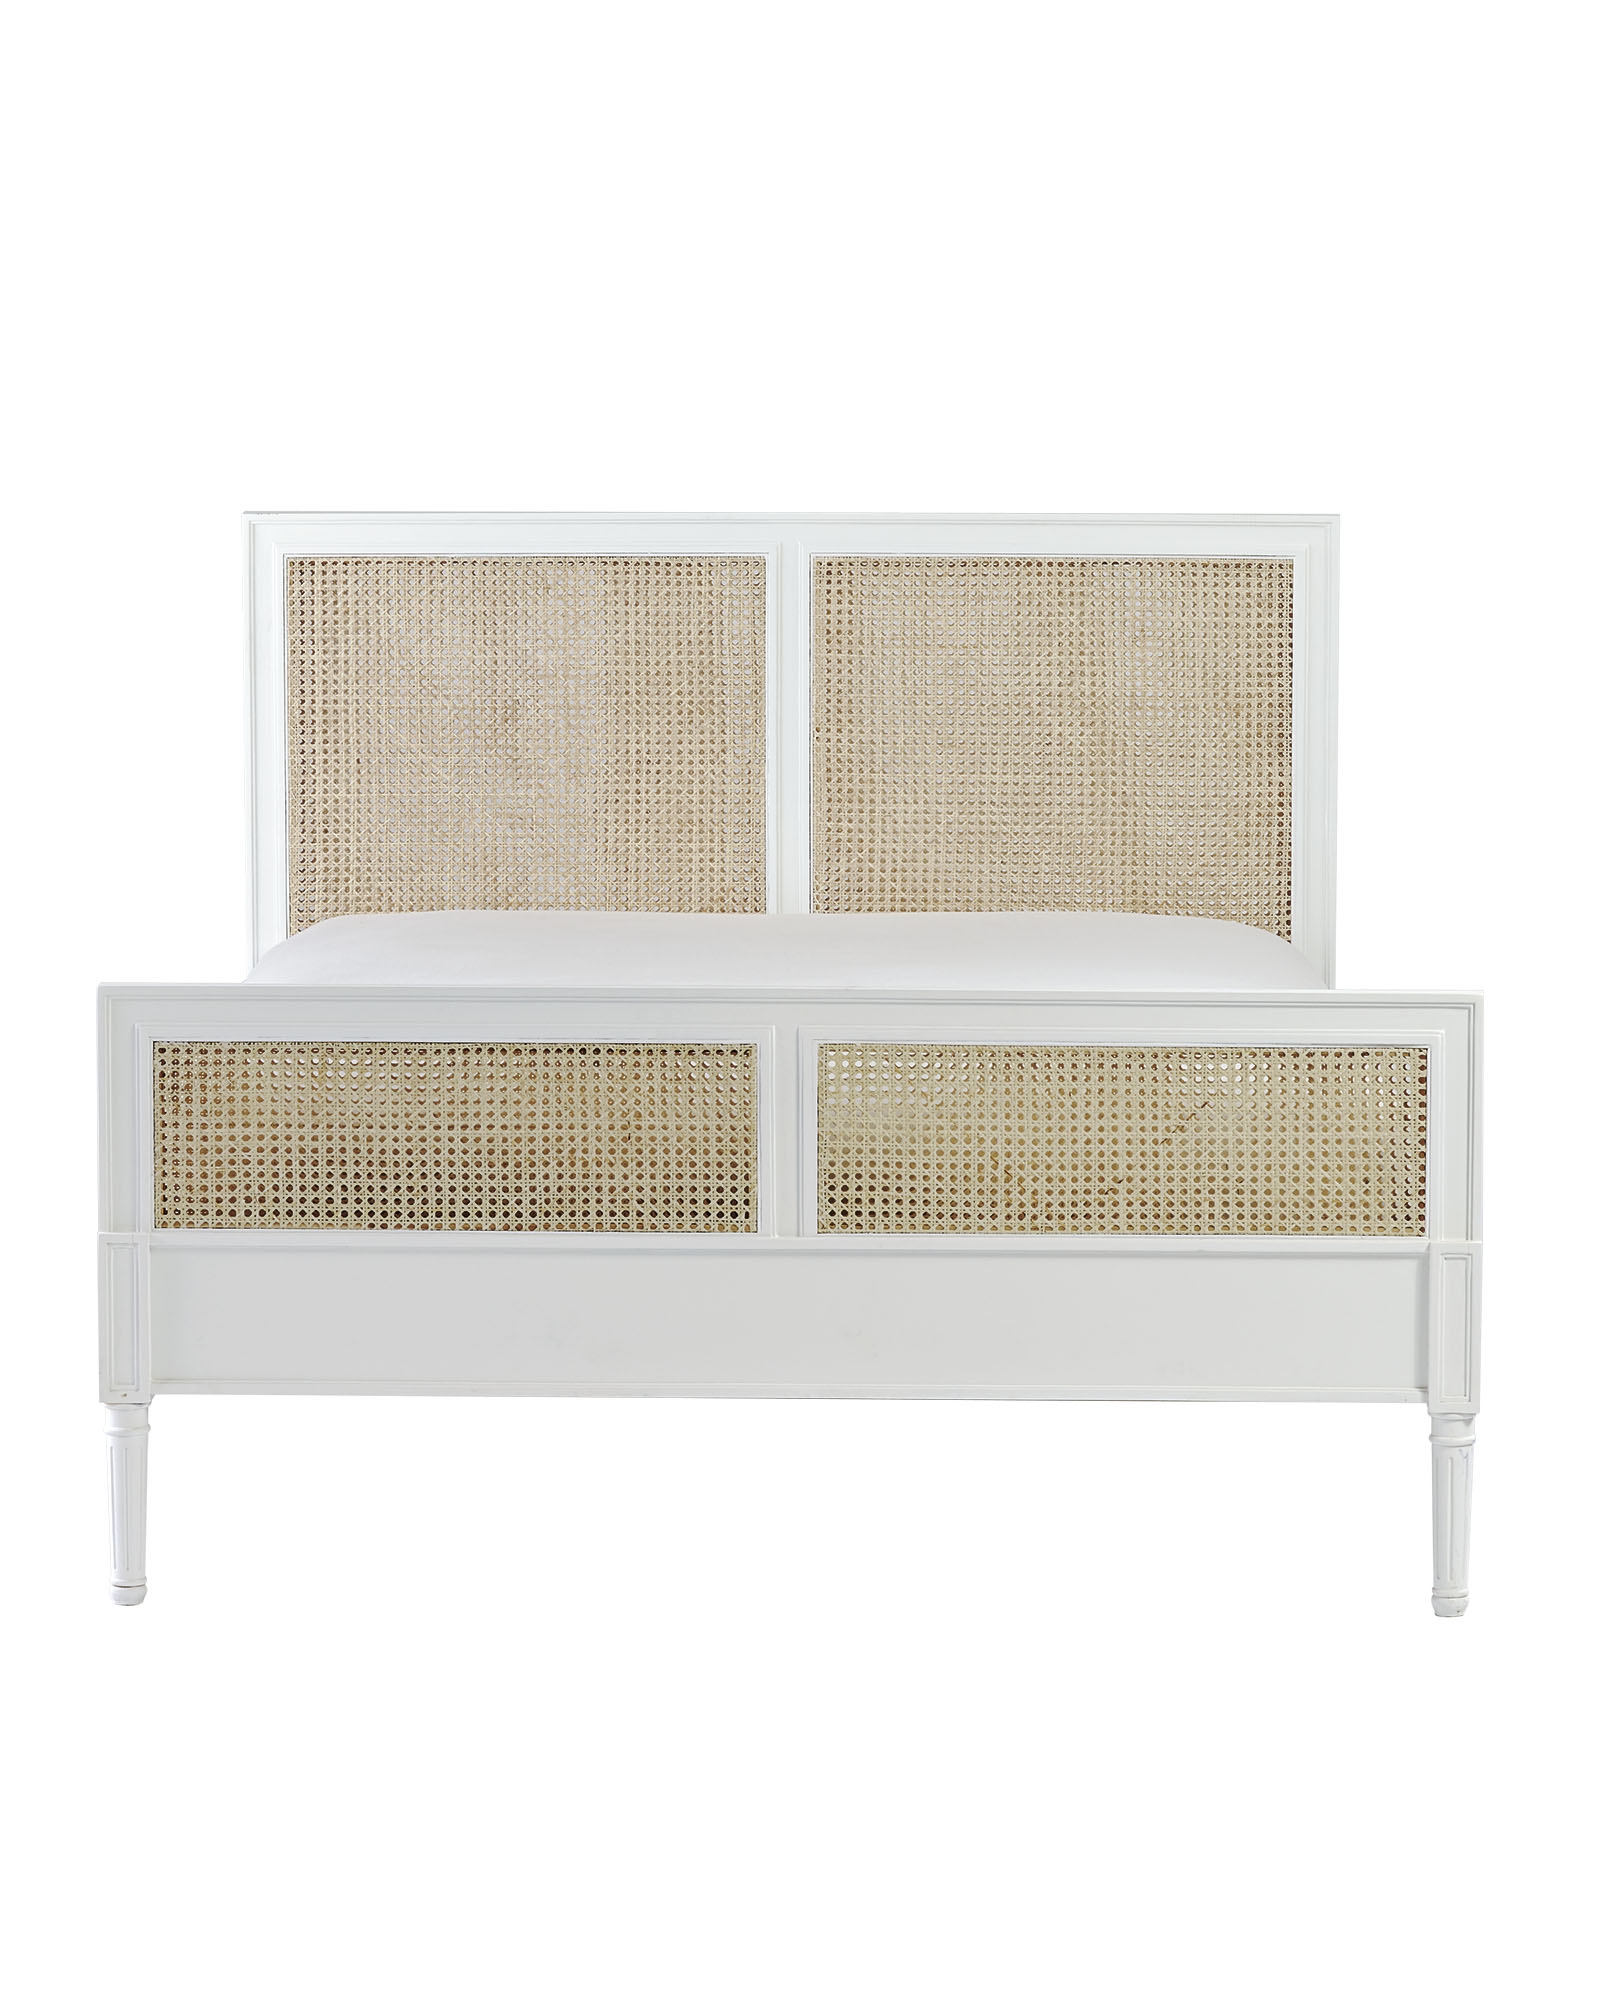 Harbour Cane Queen Bed - White - Image 2